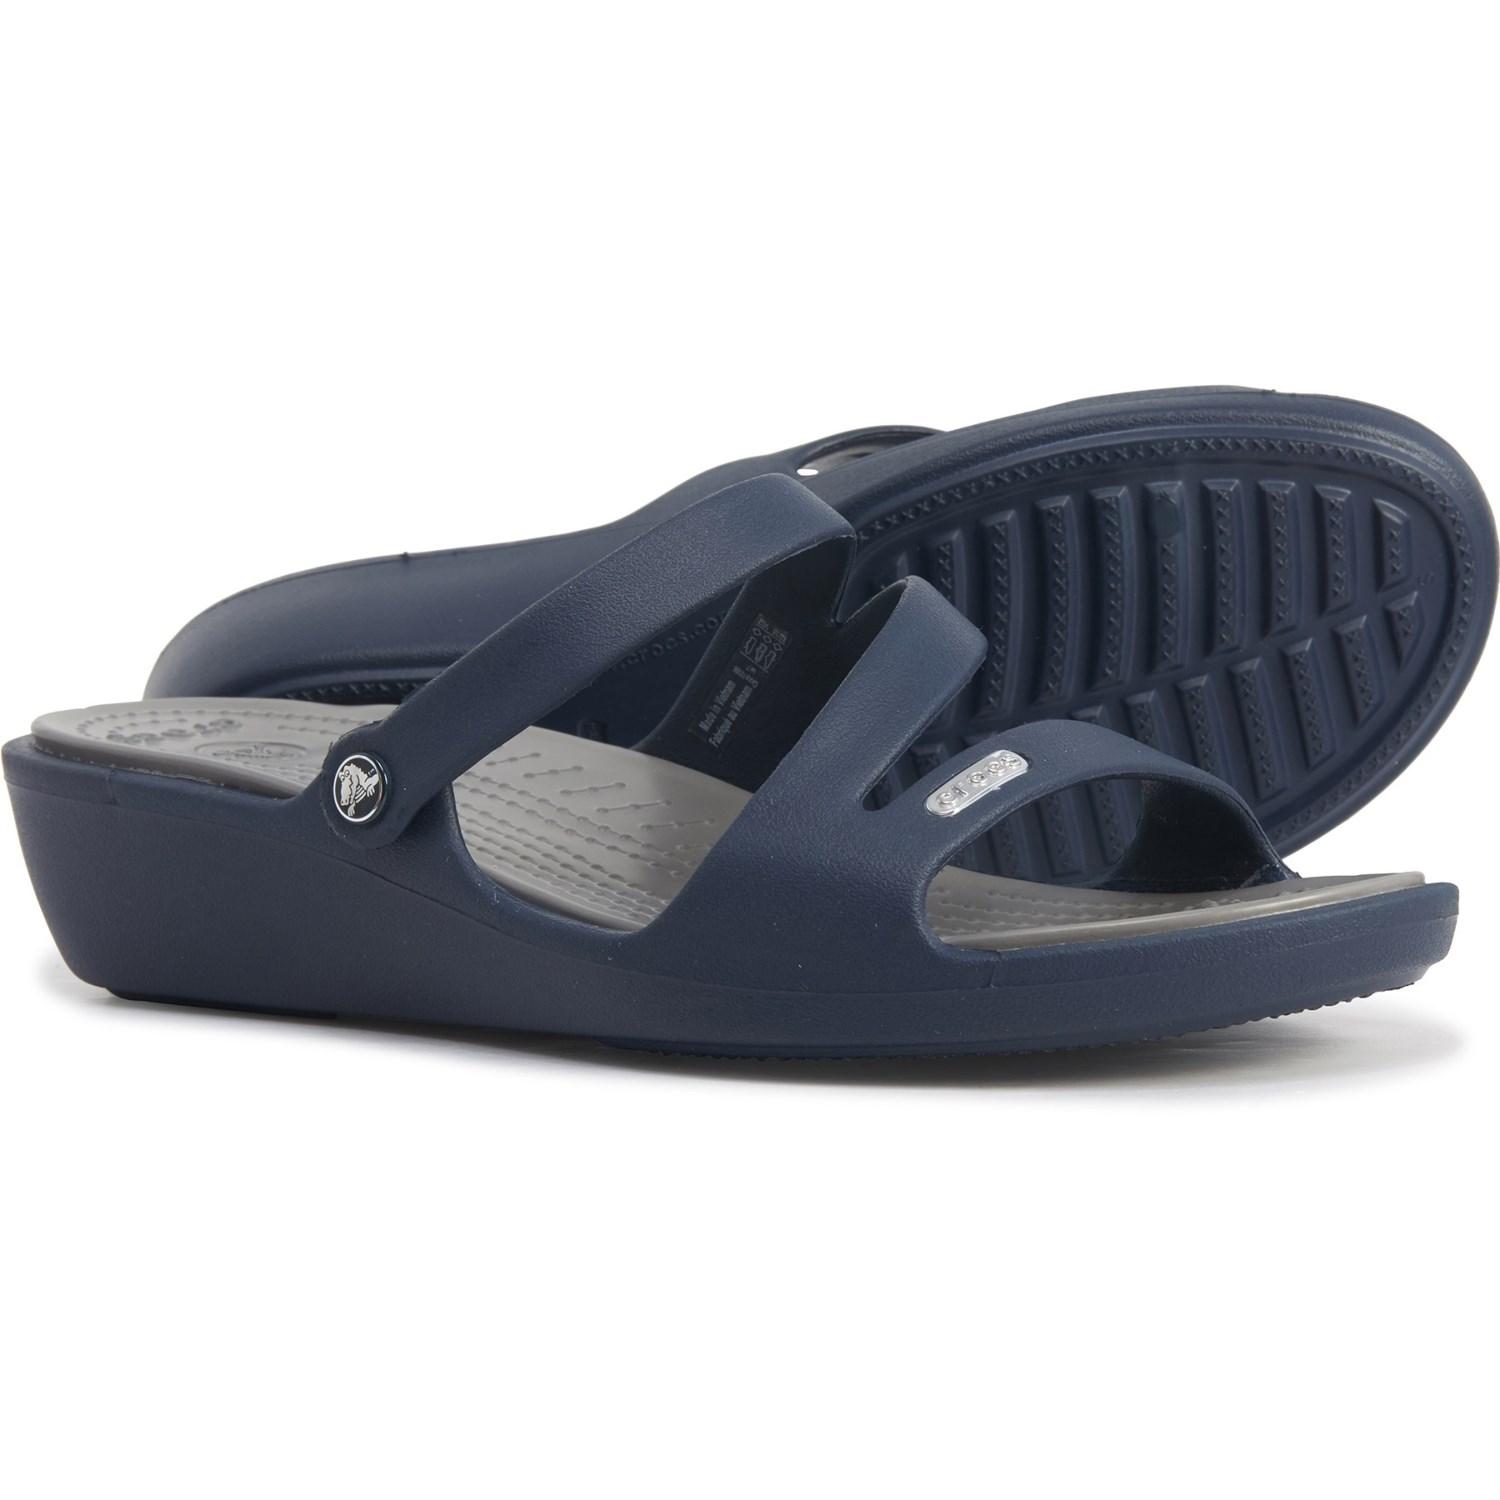 Crocs™ Patricia Wedge Sandals in Navy/Smoke (Blue) - Save 21% - Lyst